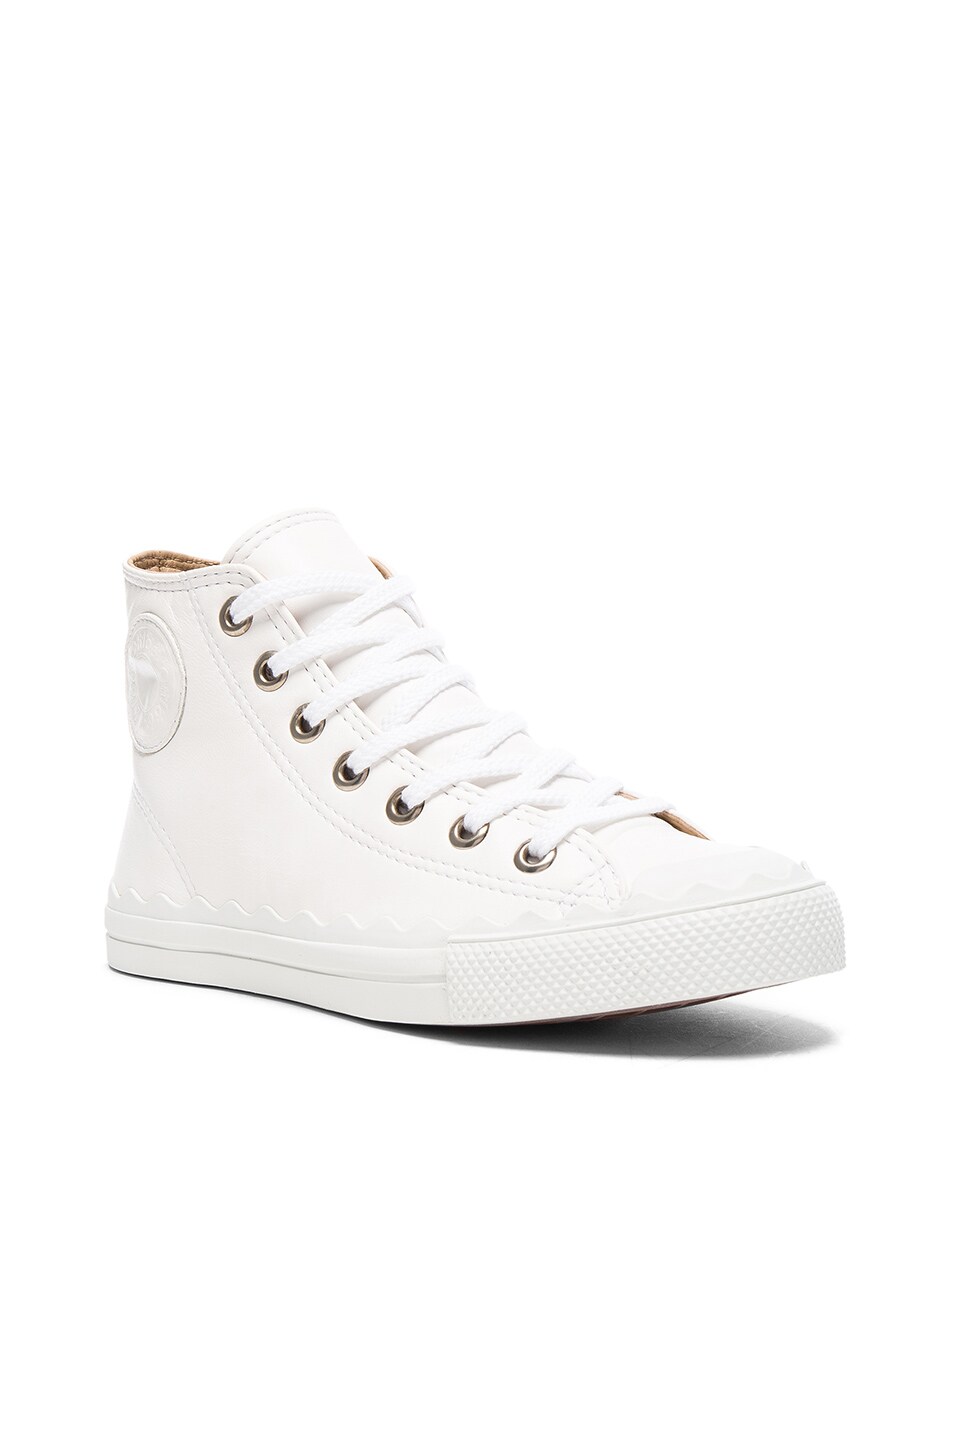 CHLOÉ CHLOE LEATHER KYLE SNEAKERS IN WHITE